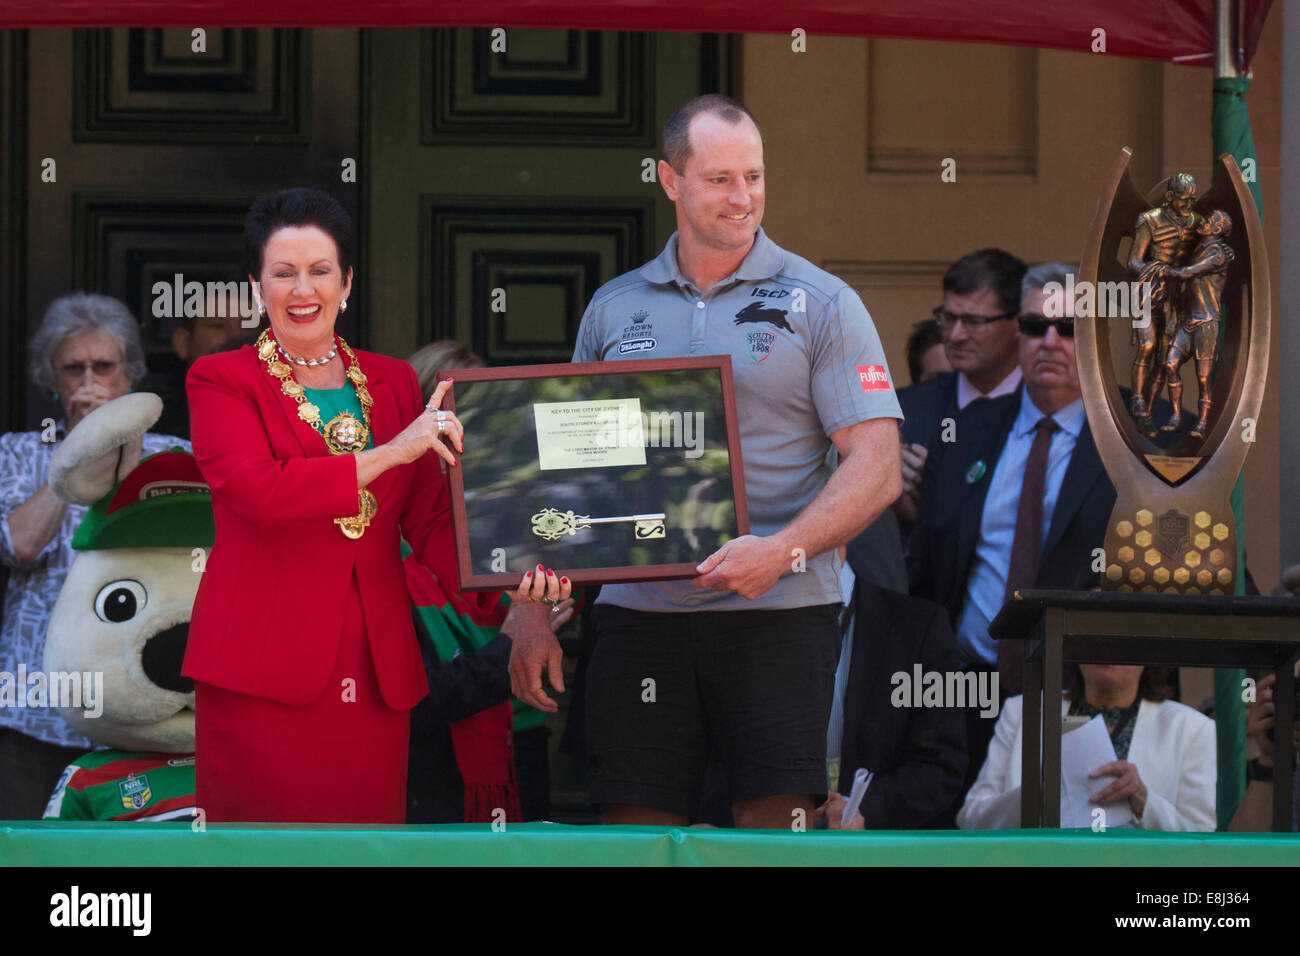 Sydney, NSW, Australia. 9th October 2014. After winning the NRL Grand Final, the South Sydney Rabbitohs were given the keys to the City of Sydney by the Lord Mayor at a ceremony in Sydney Square watched by fans of the rugby team. Pictured: Lord Mayor of Sydney Clover Moore presents South Sydney Rabbitohs Coach Michael Maguire with the keys to the City of Sydney, after the team won the NRL Grand Final. Copyright Credit:  2014 Richard Milnes/Alamy Live News. Stock Photo